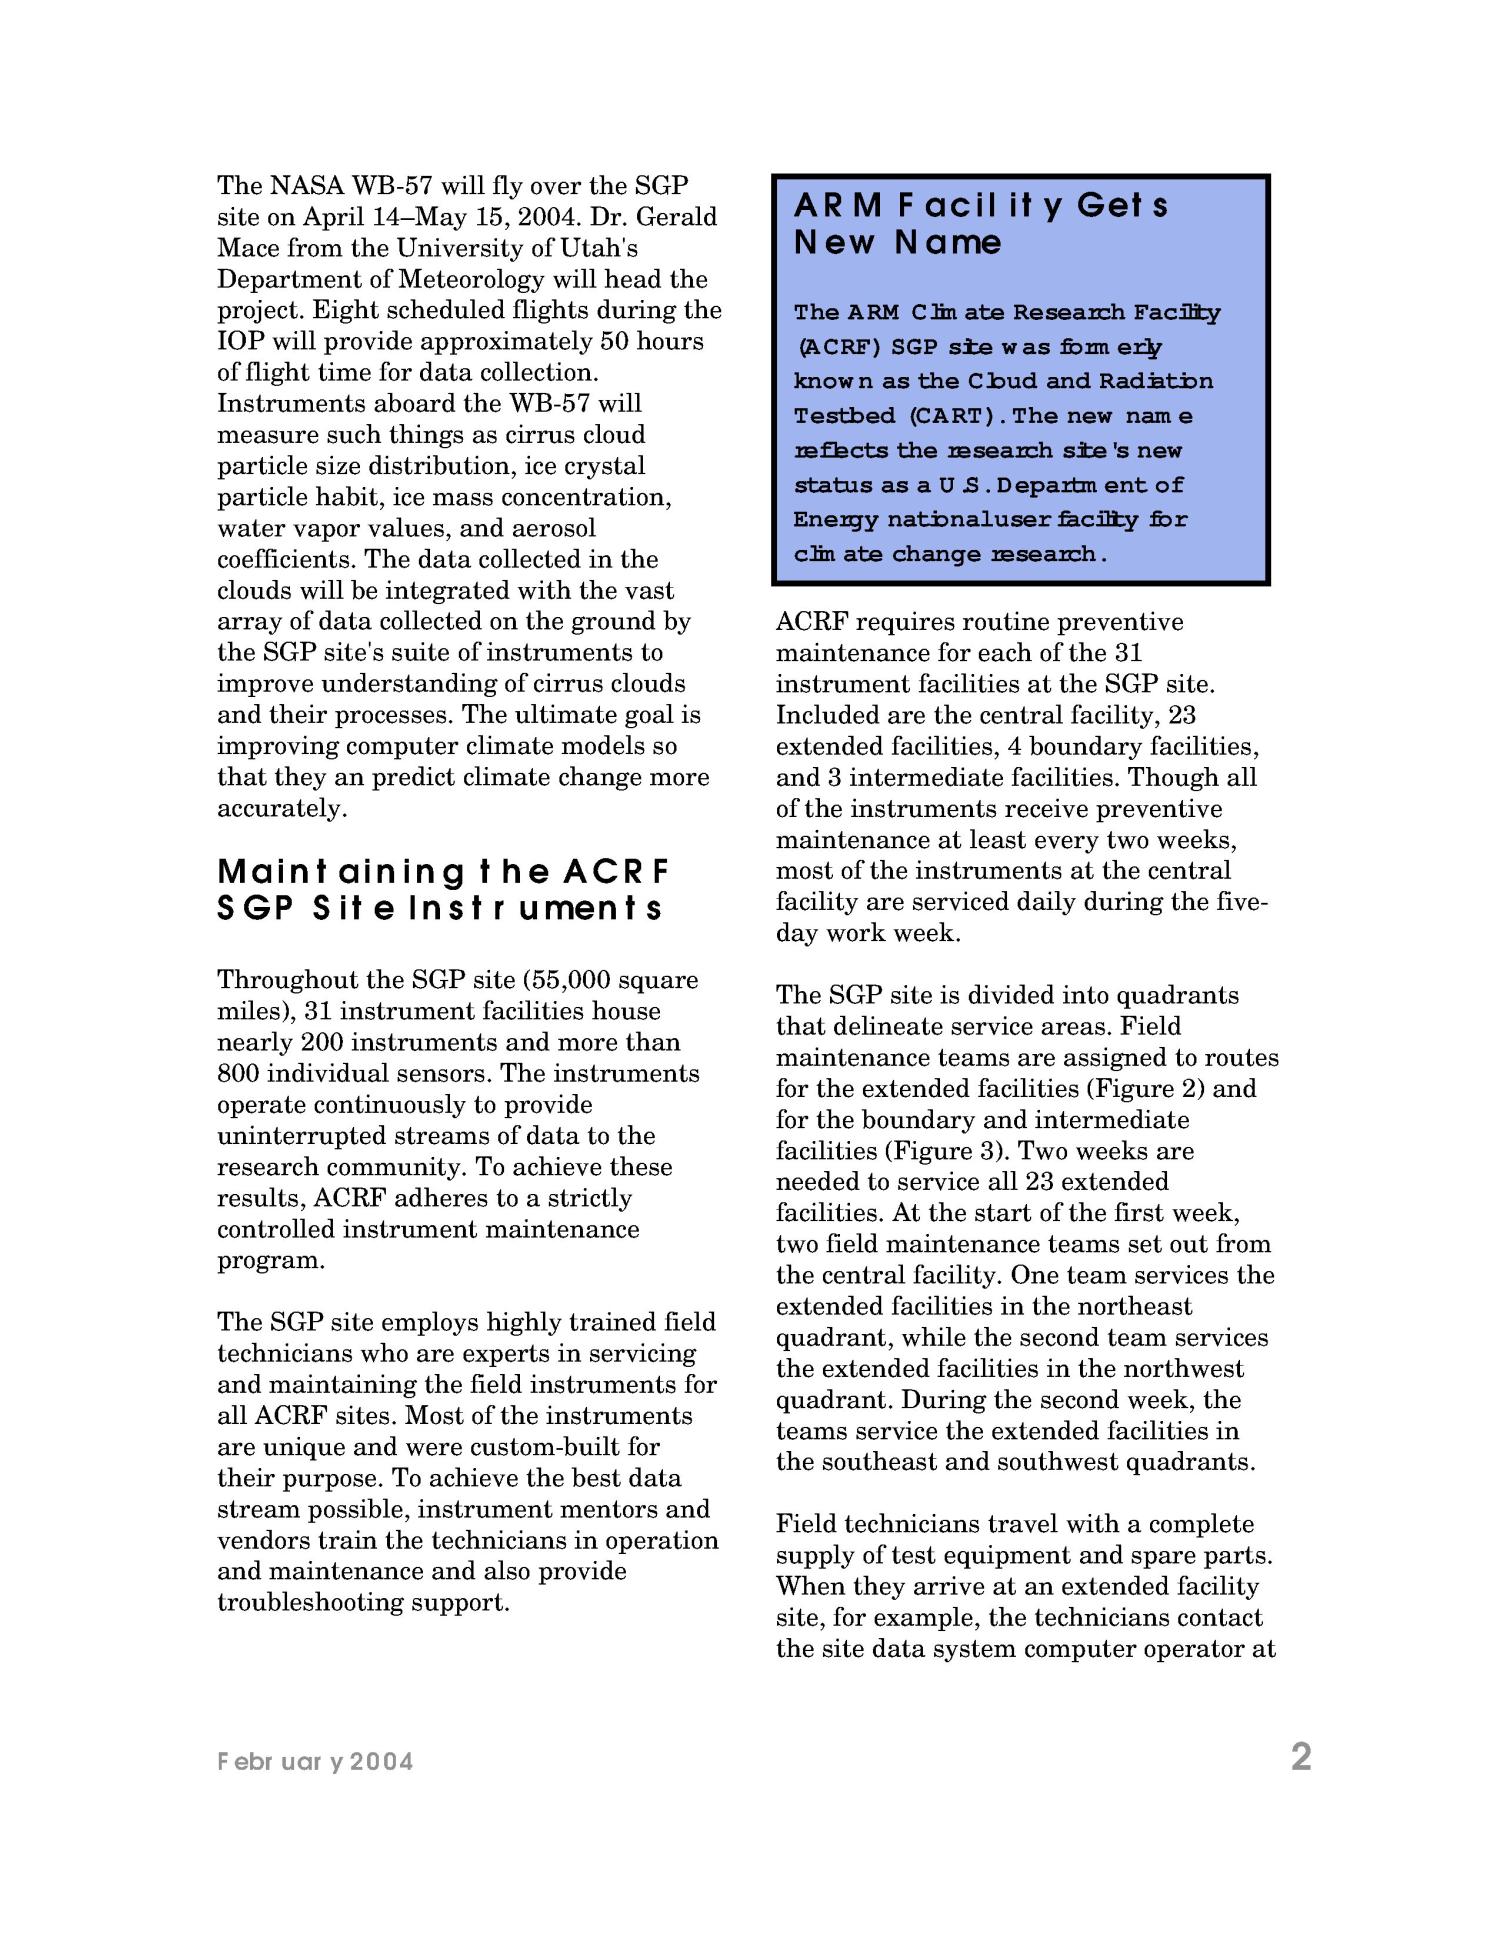 Atmospheric Radiation Measurement Program Facilities Newsletter, February 2004.
                                                
                                                    [Sequence #]: 2 of 3
                                                